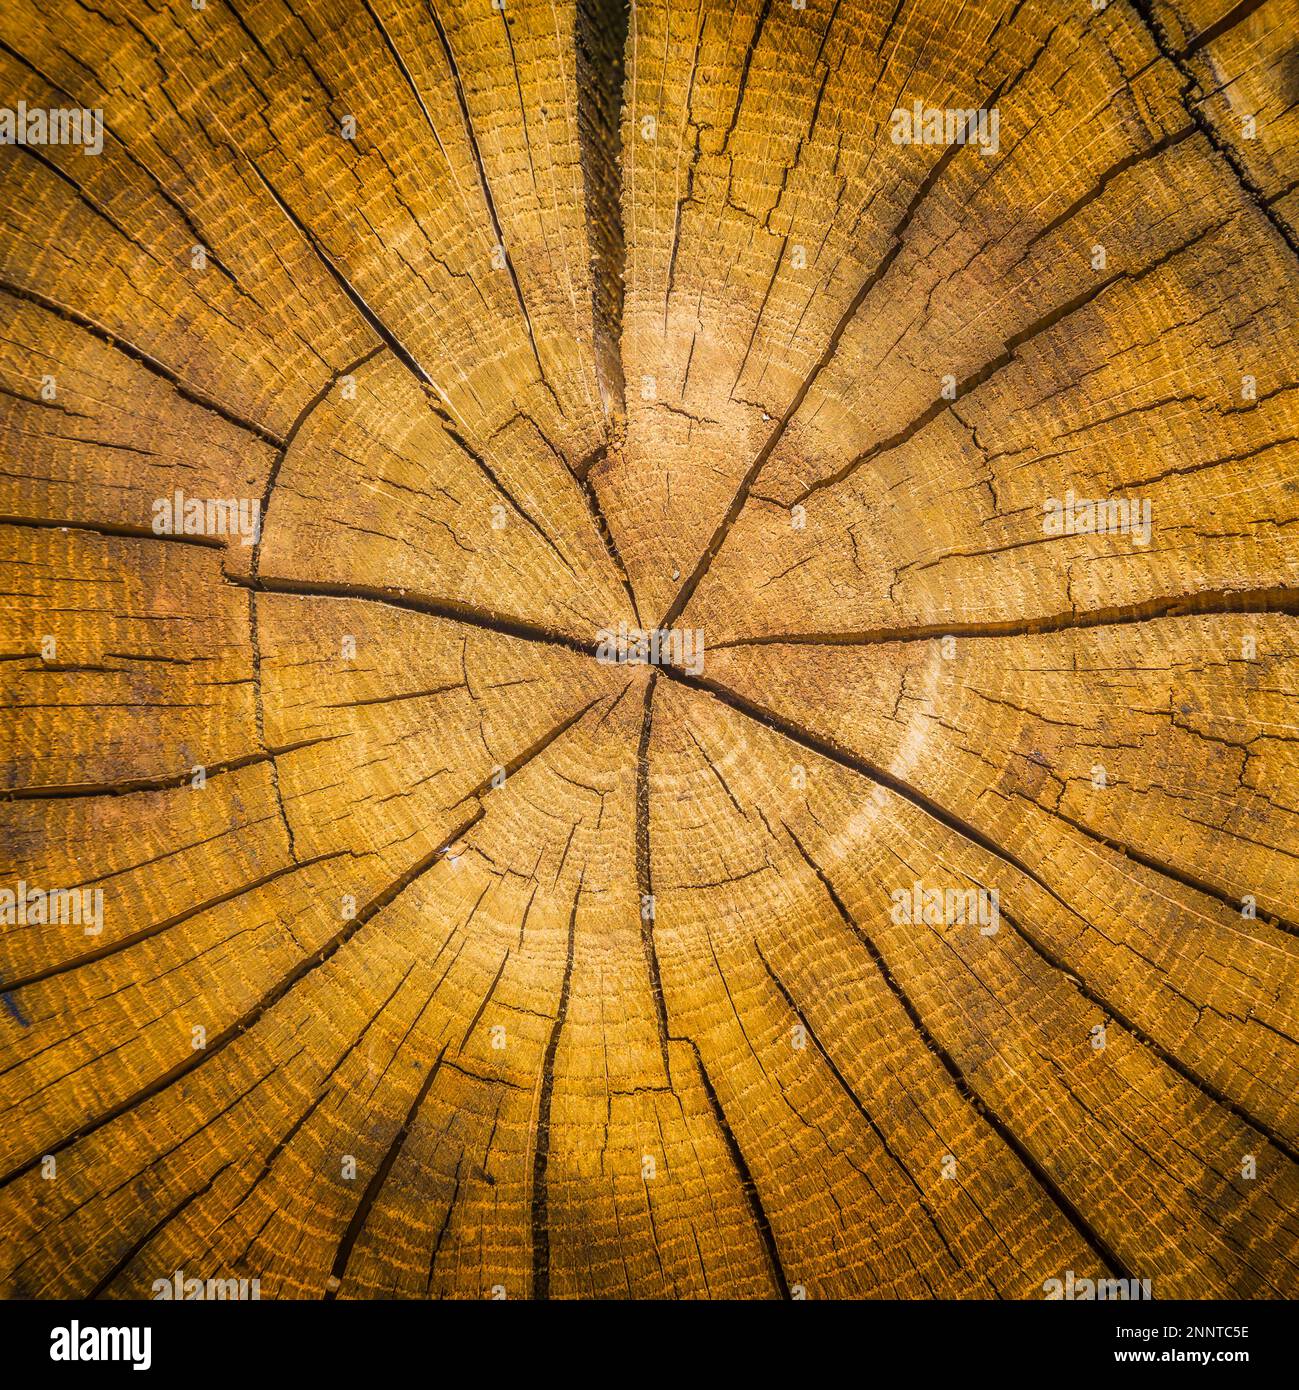 Cracked Age Rings of a Tree Stump (Dendrochronology) Stock Photo